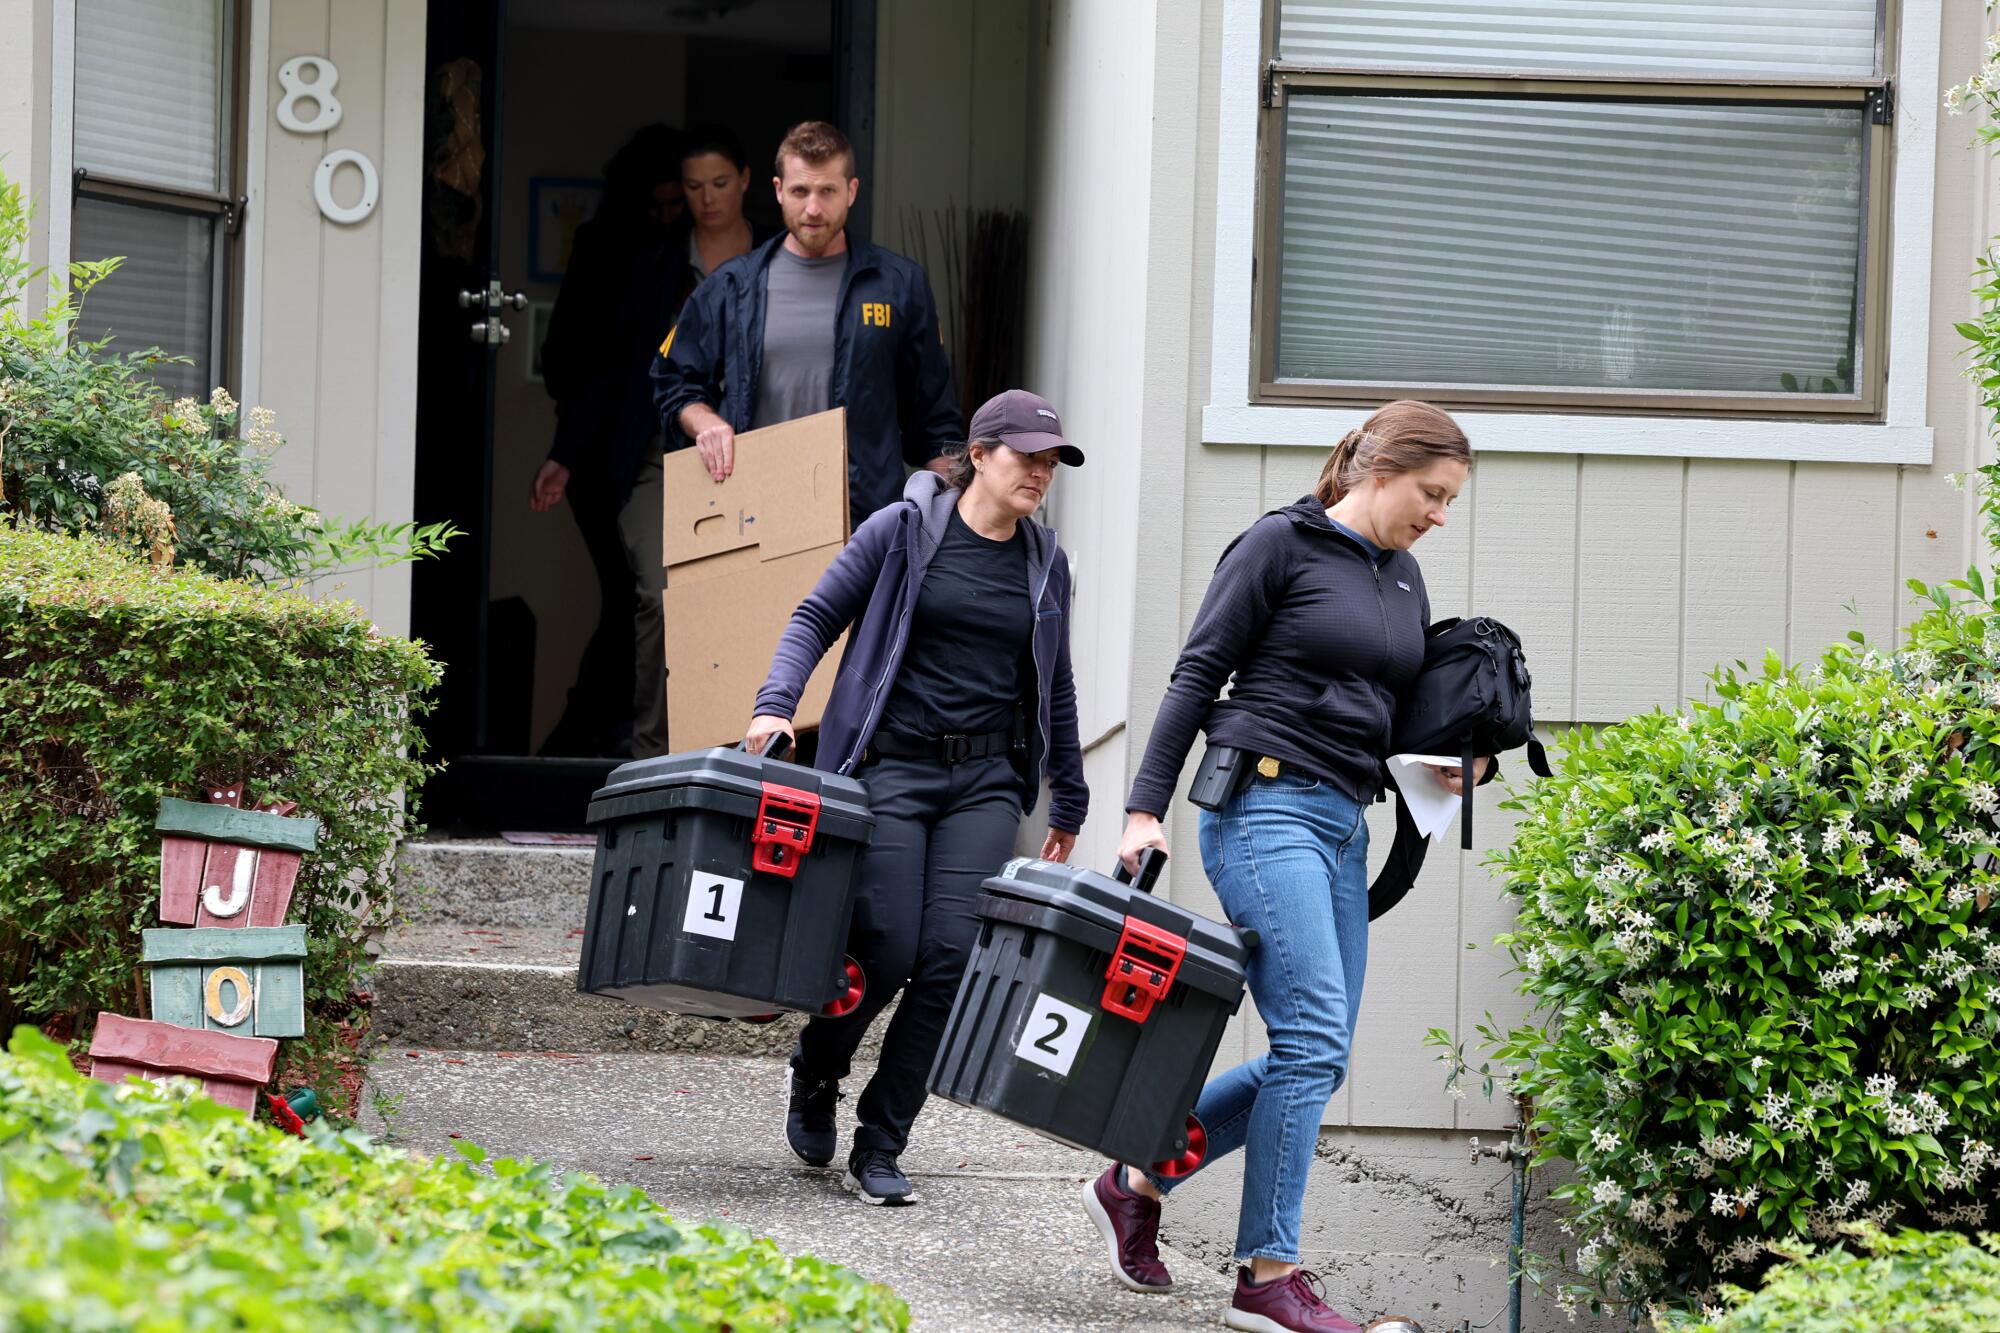 People carry storage bins from a home.